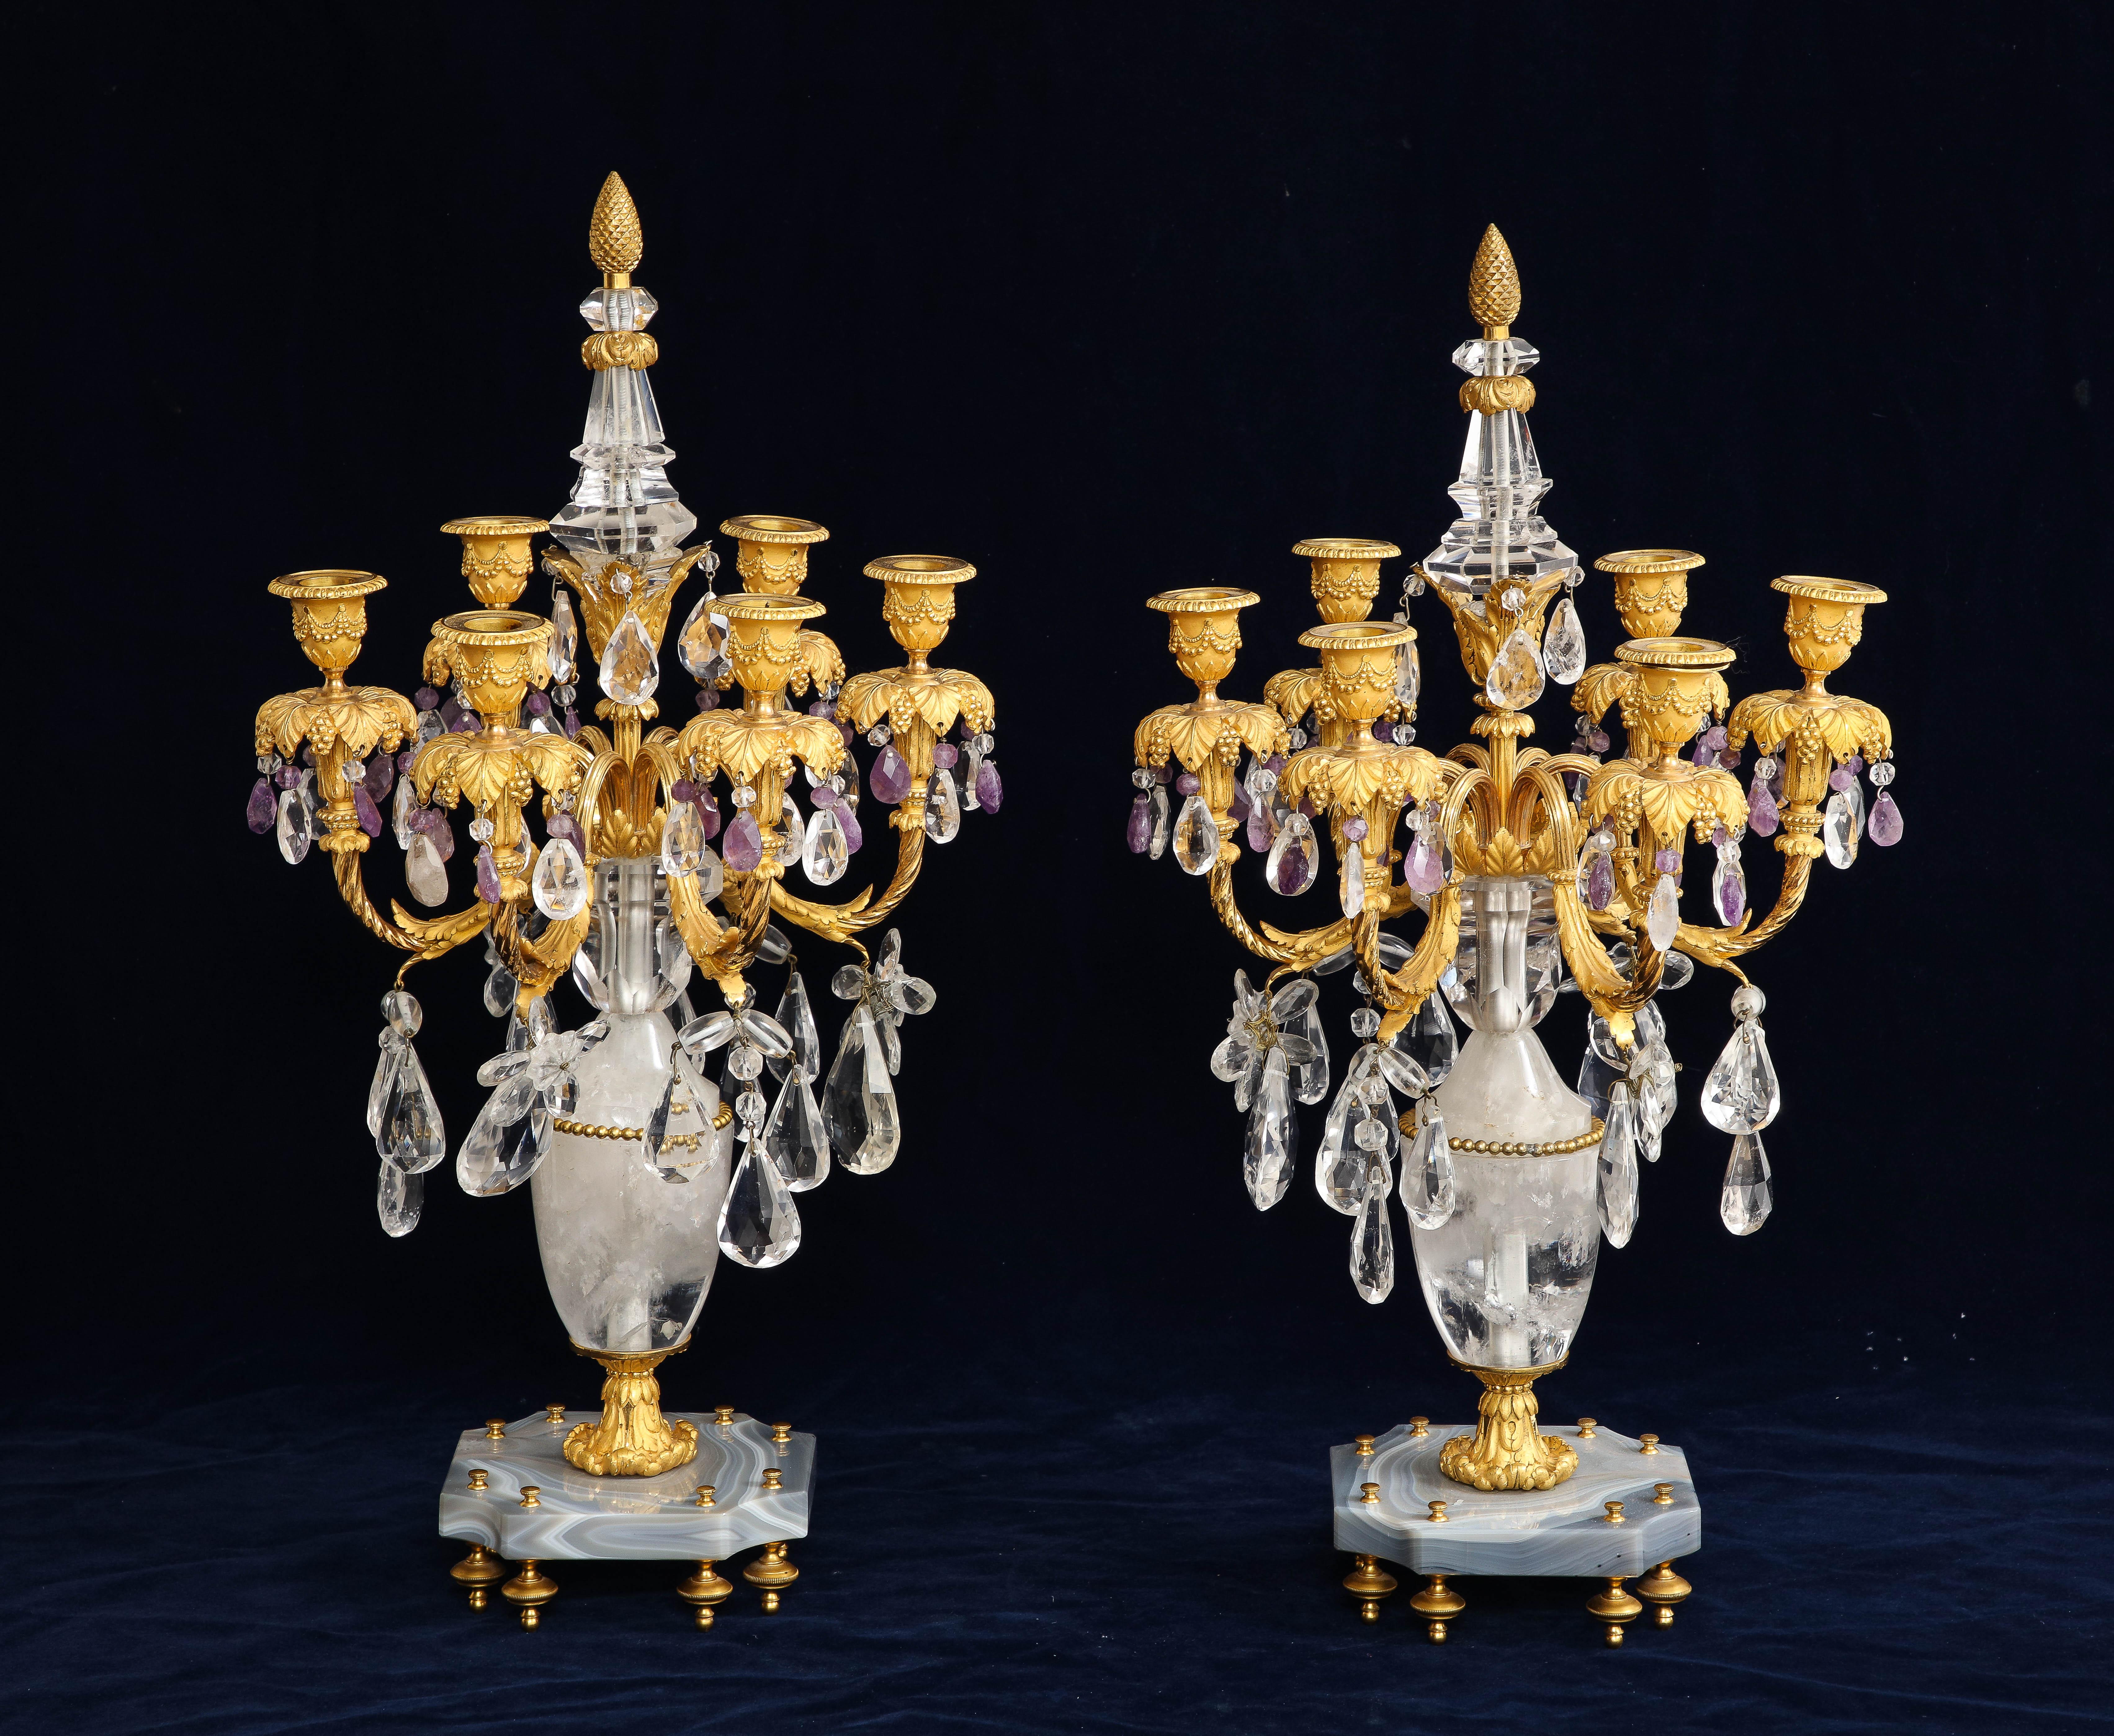 Louis XVI Pair 19th C. French Dore Bronze Mtd. Agate, Rock Crystal, & Amethyst Candelabra For Sale